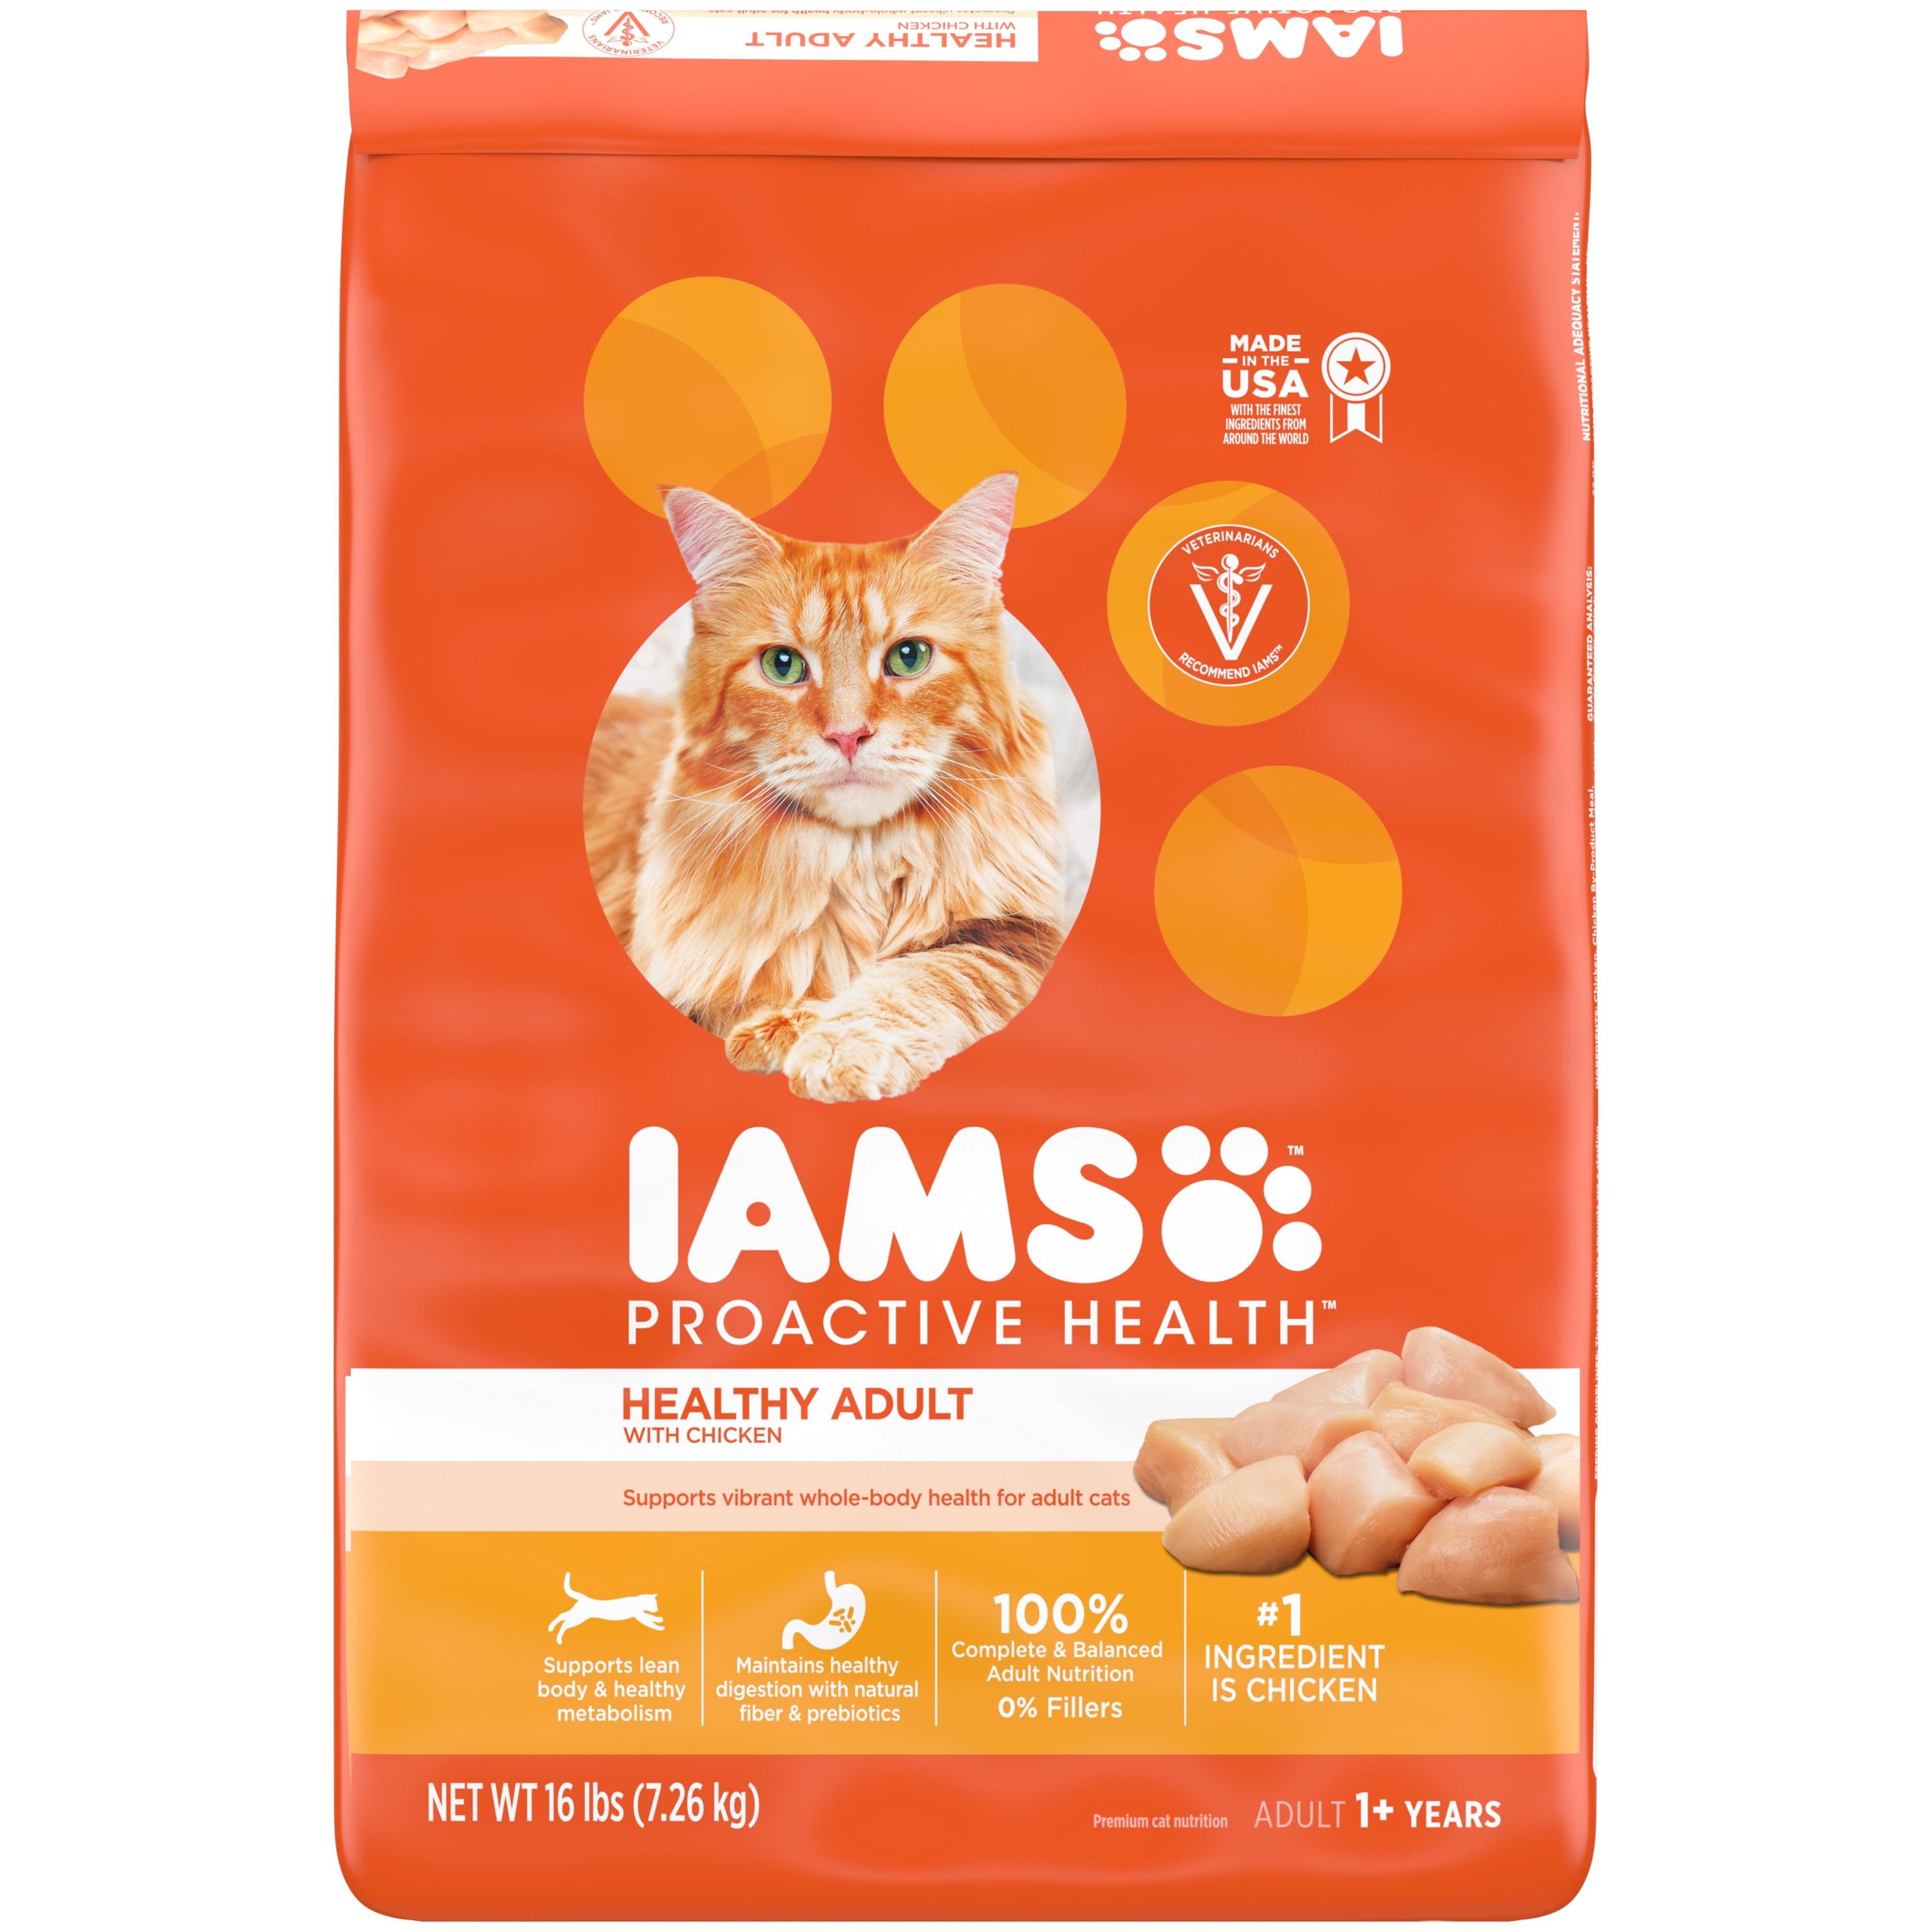 IAMS PROACTIVE HEALTH Healthy Adult Dry Cat Food with Chicken, 16 lb. Bag